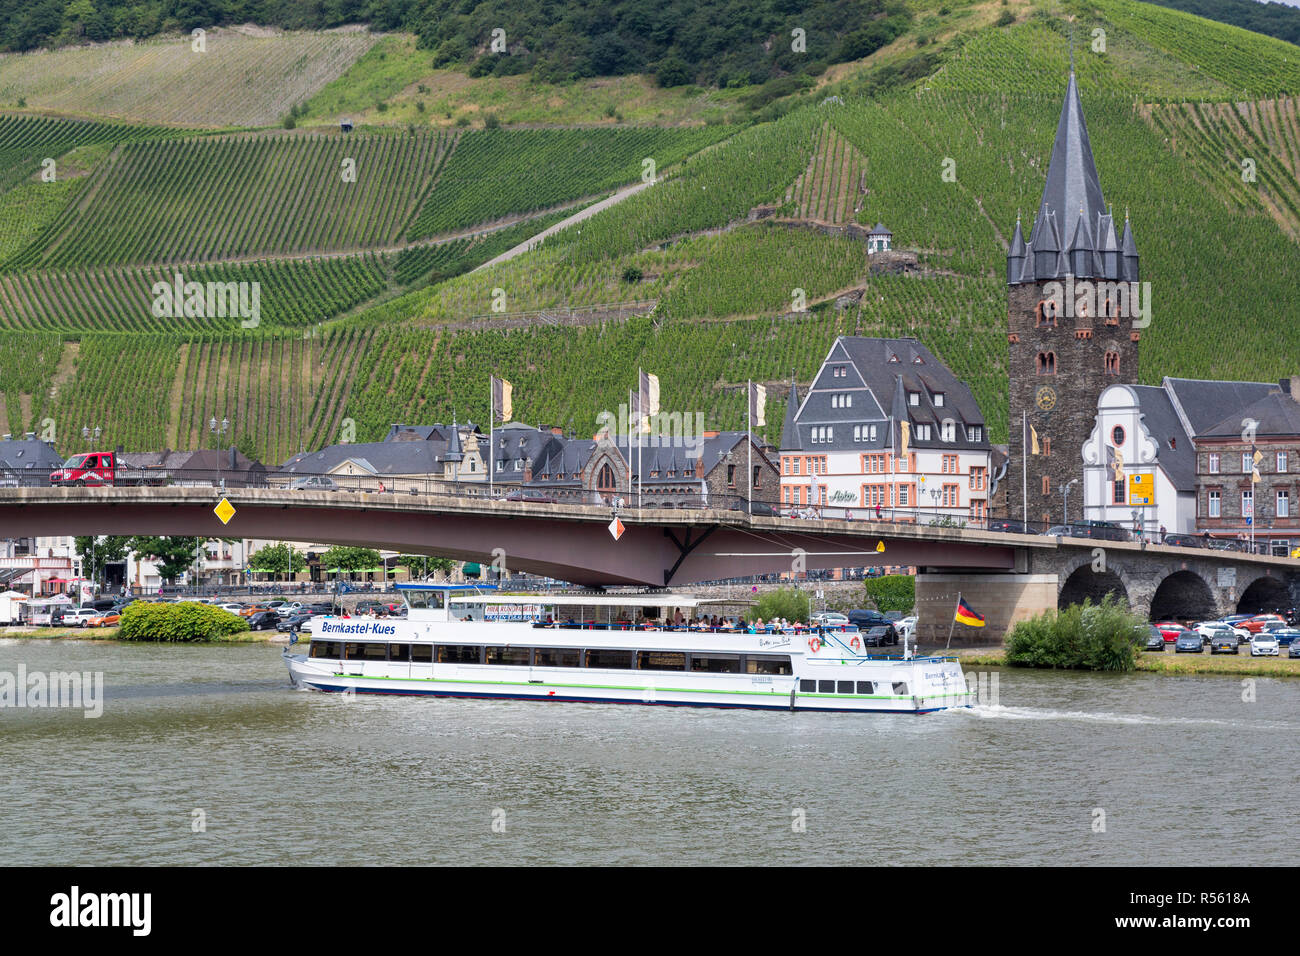 Bernkastel, Germany.  A Tourist River Cruise Boat on the Moselle.  St. Michael's Church and Medieval Tower on right. Stock Photo